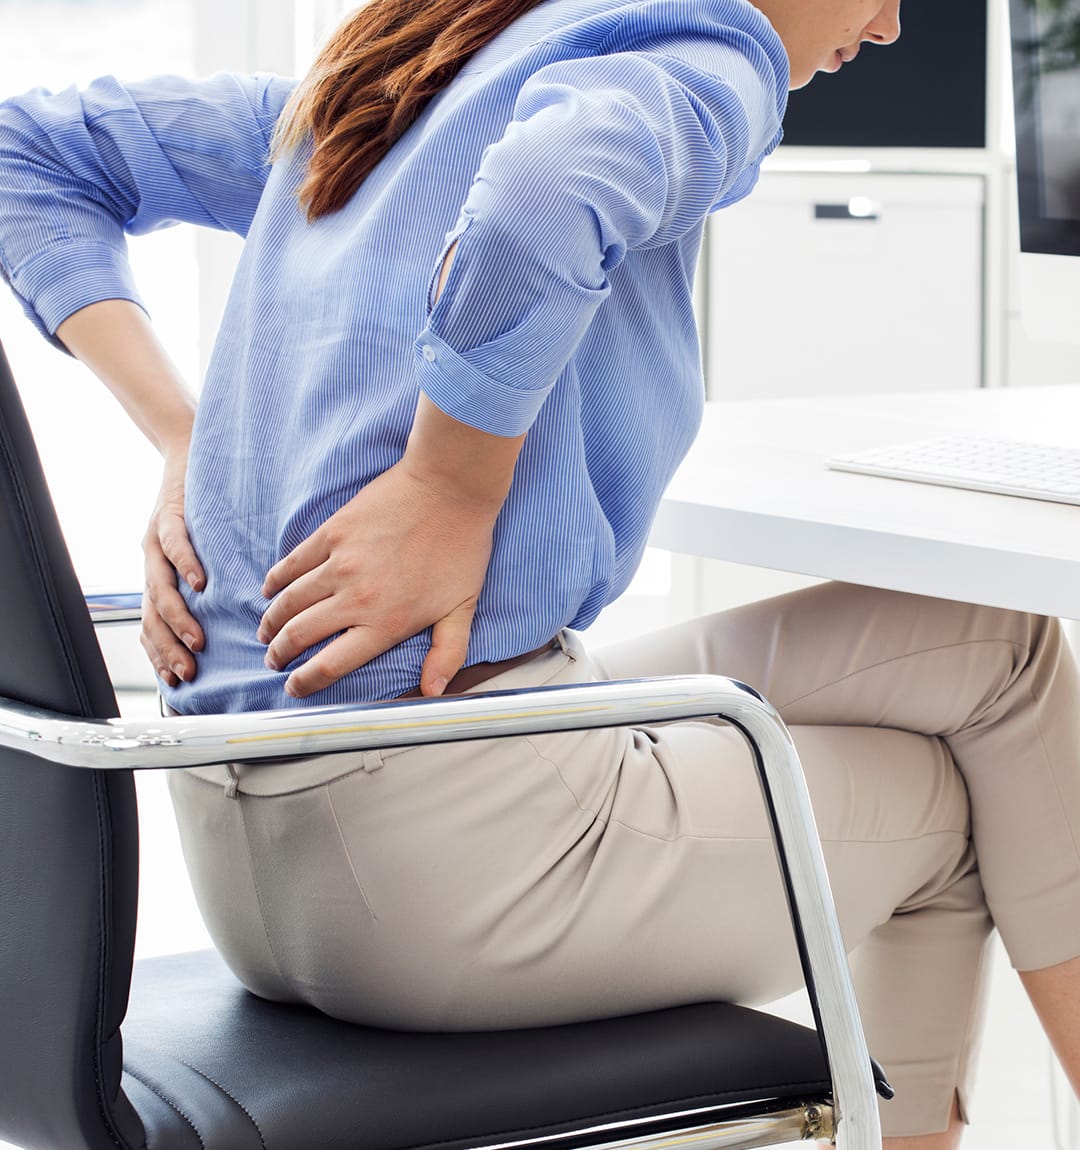 Woman at a desk holding her lower back